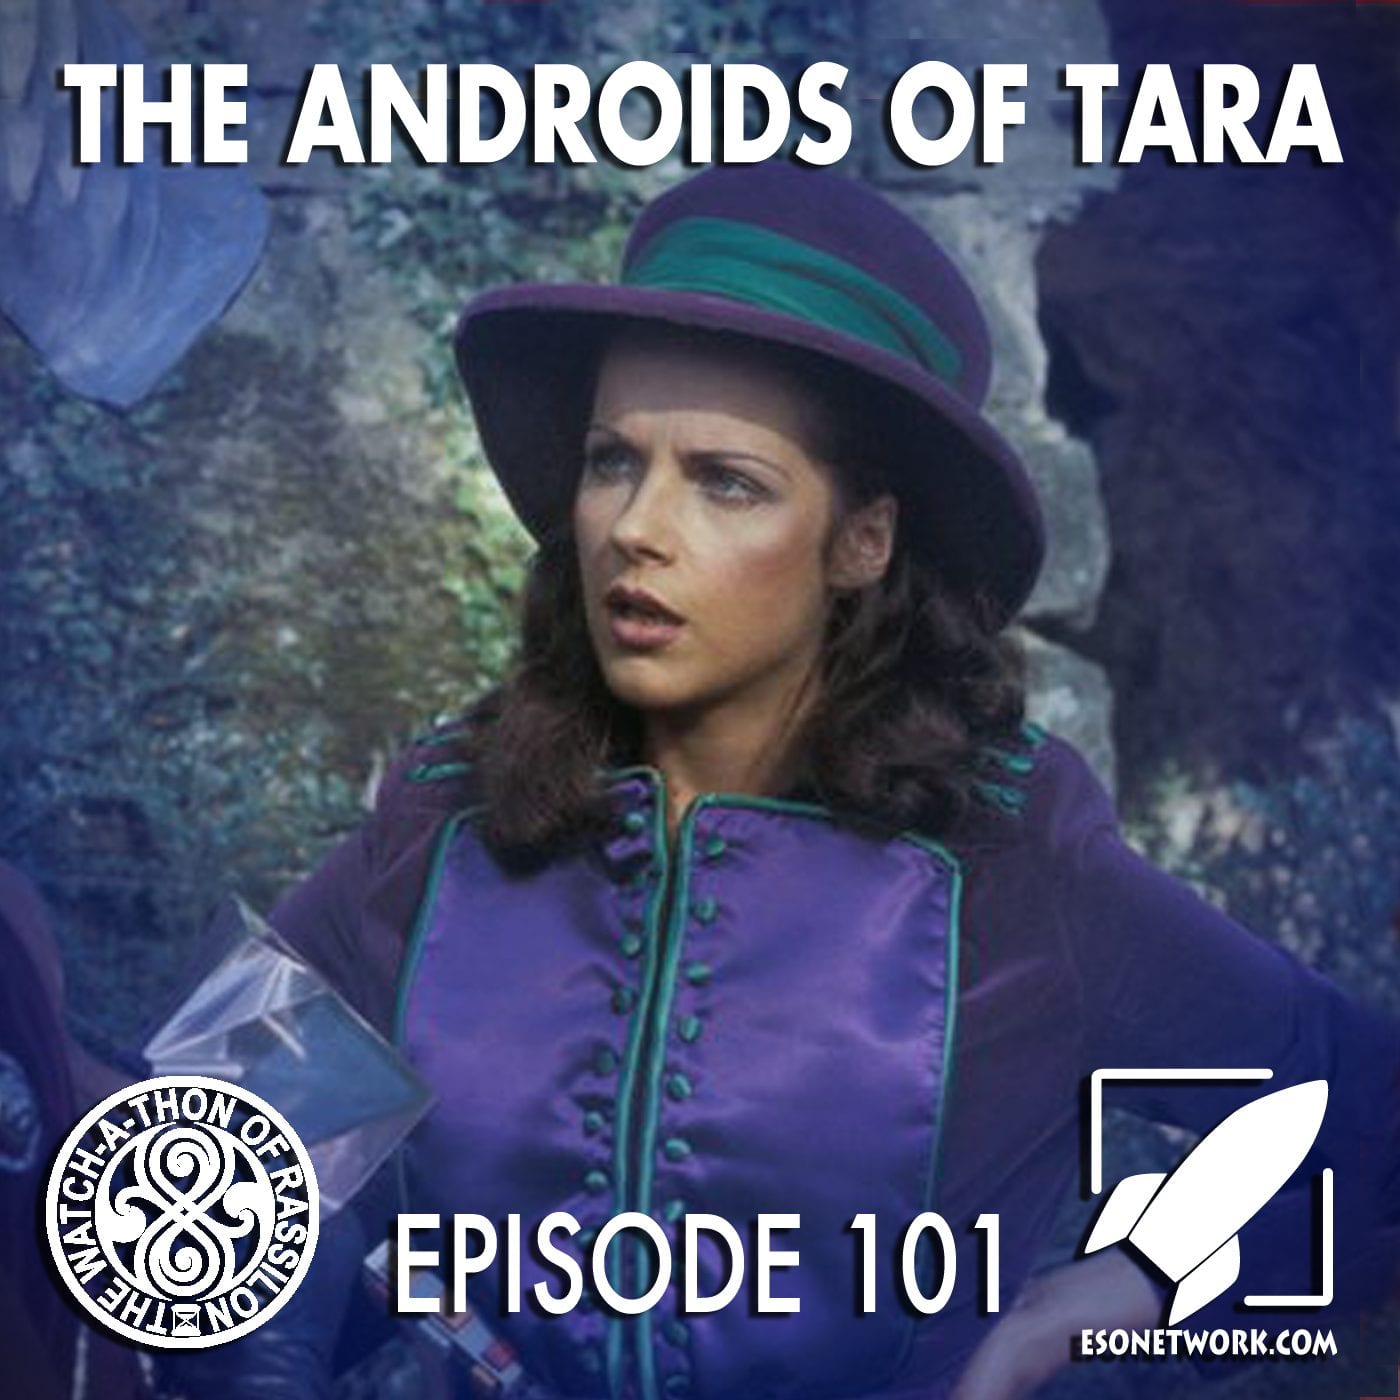 The Watch-A-Thon of Rassilon: Episode 101: The Androids of Tara